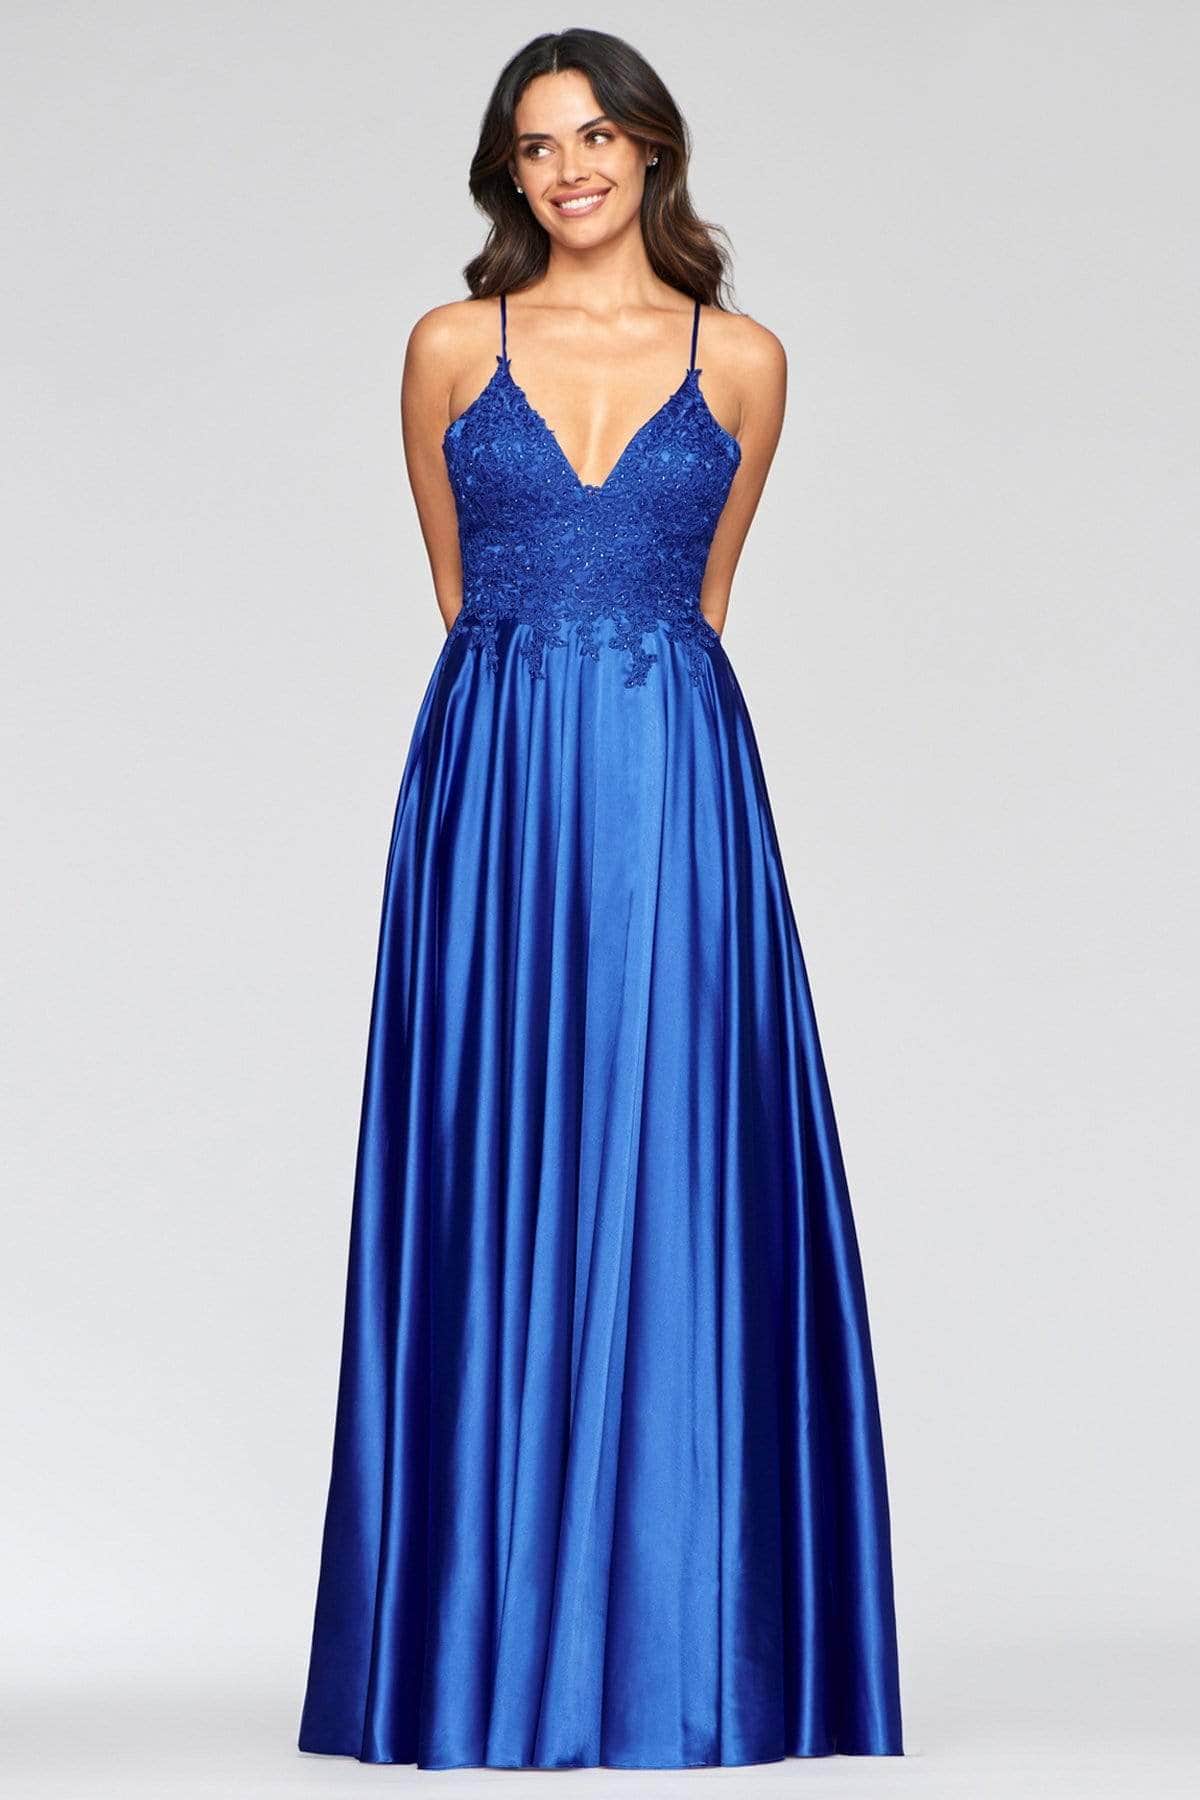 Faviana S10400 - Beaded Lace Evening Gown Prom Dresses 14 /Royal